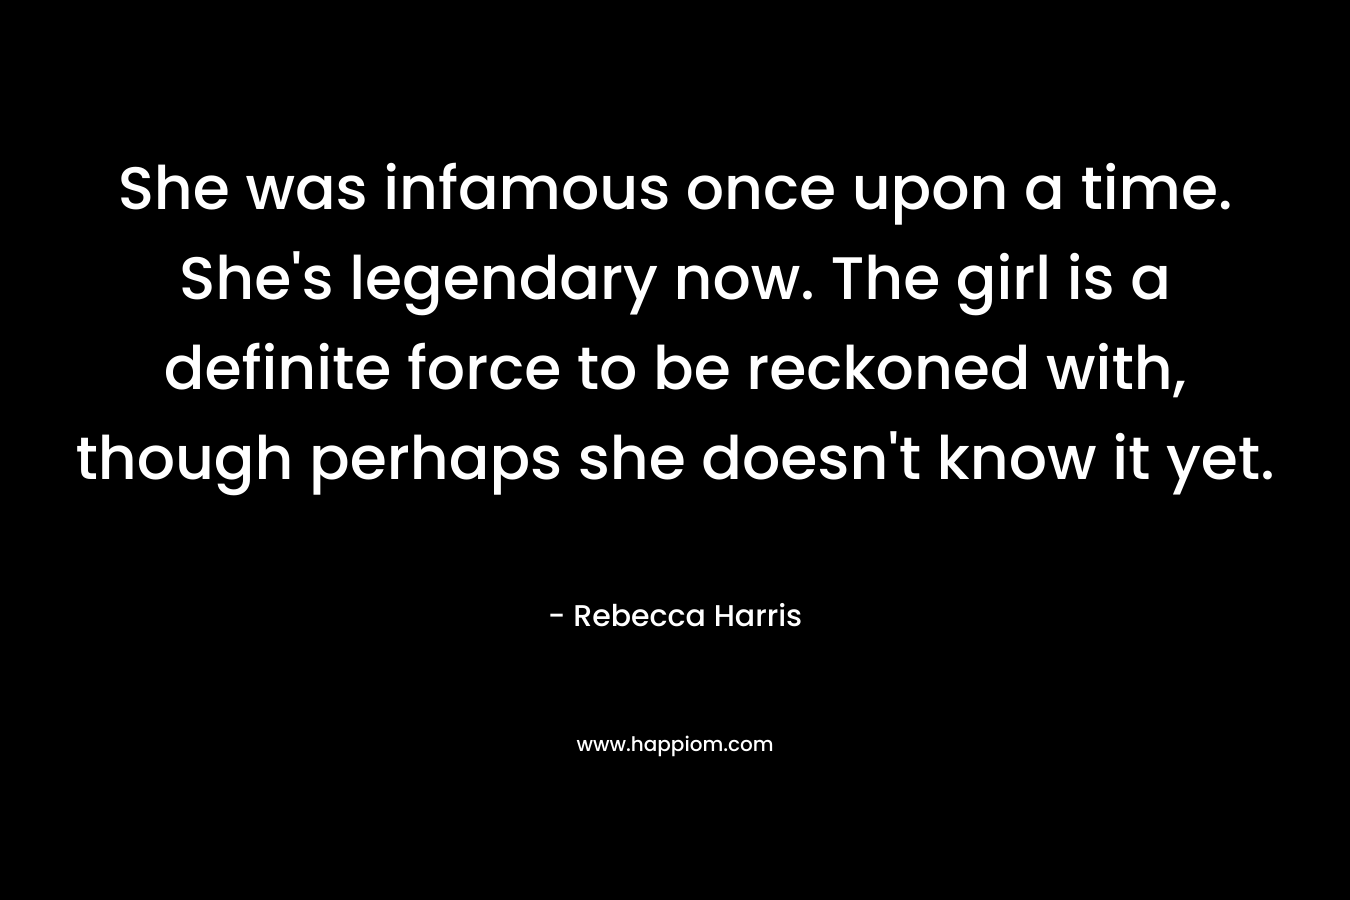 She was infamous once upon a time. She’s legendary now. The girl is a definite force to be reckoned with, though perhaps she doesn’t know it yet. – Rebecca Harris